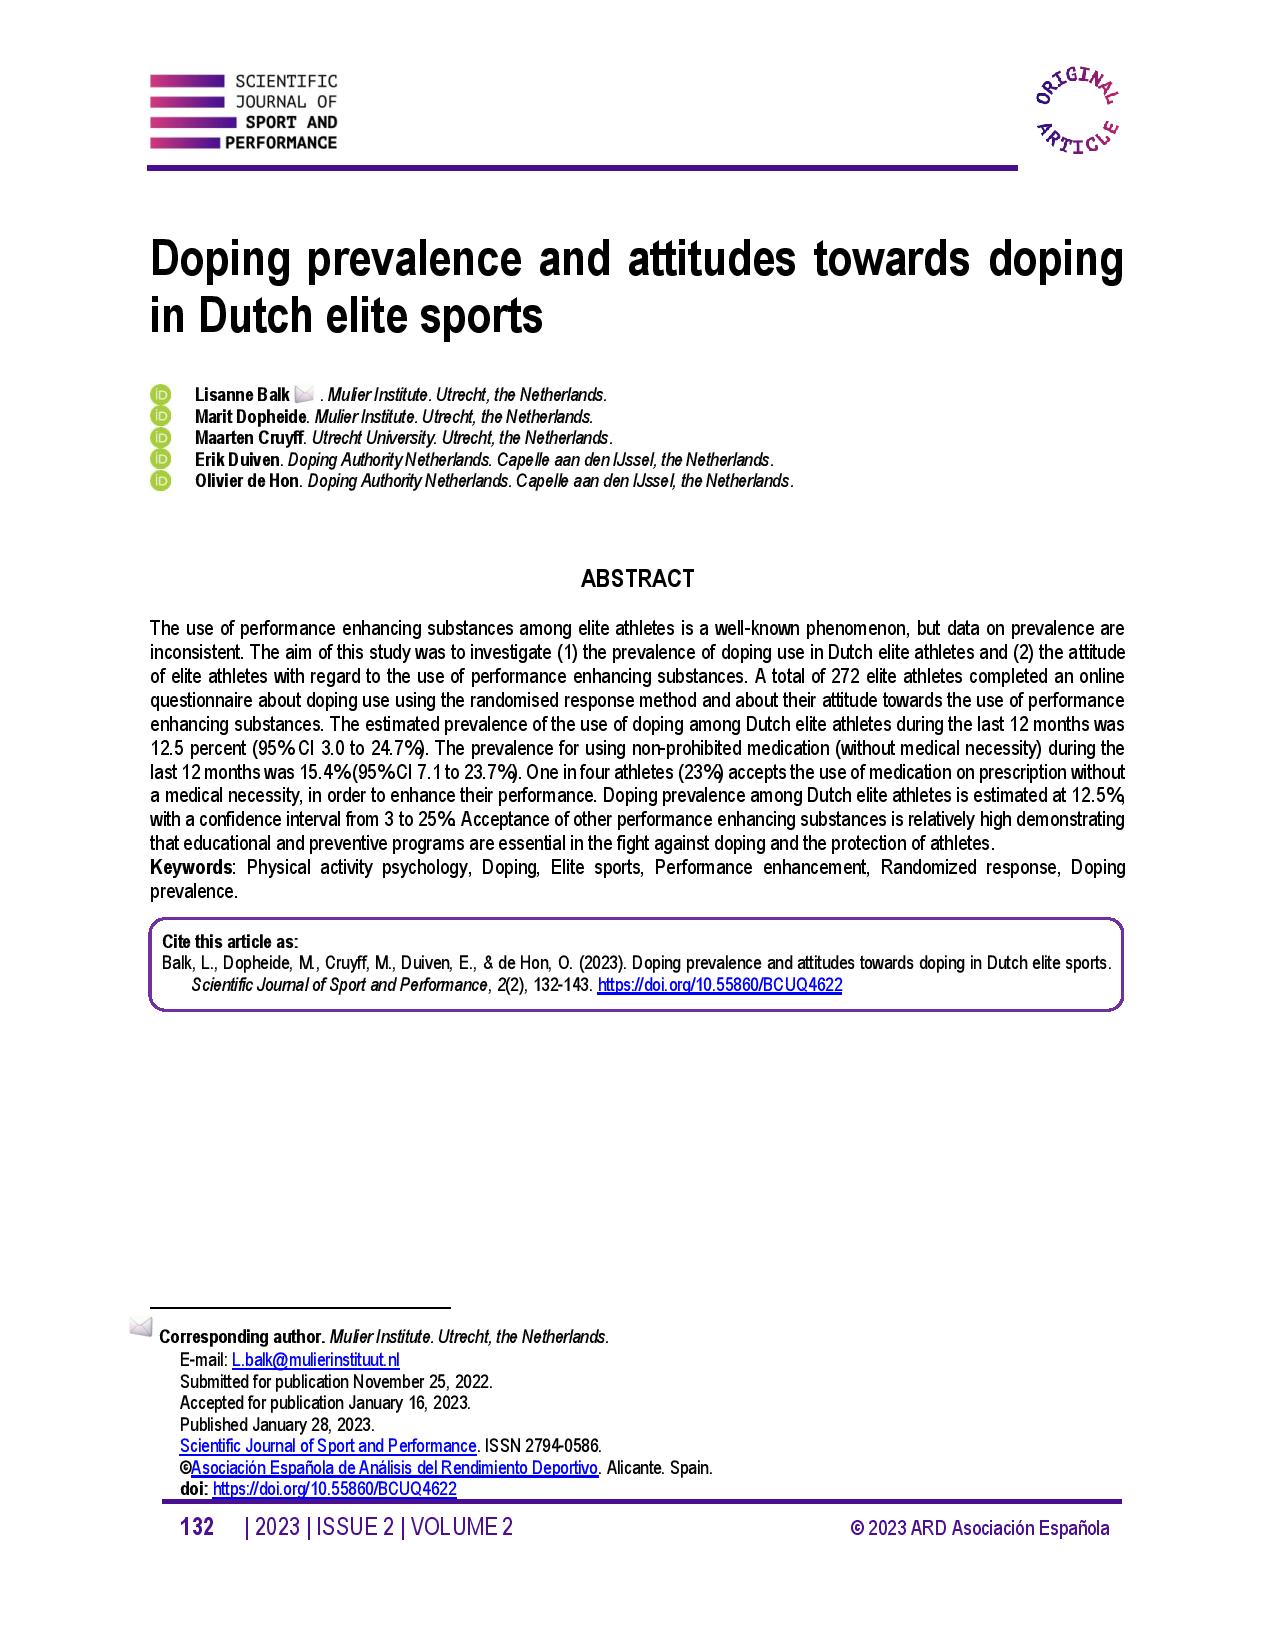 Doping prevalence and attitudes towards doping in Dutch elite sports